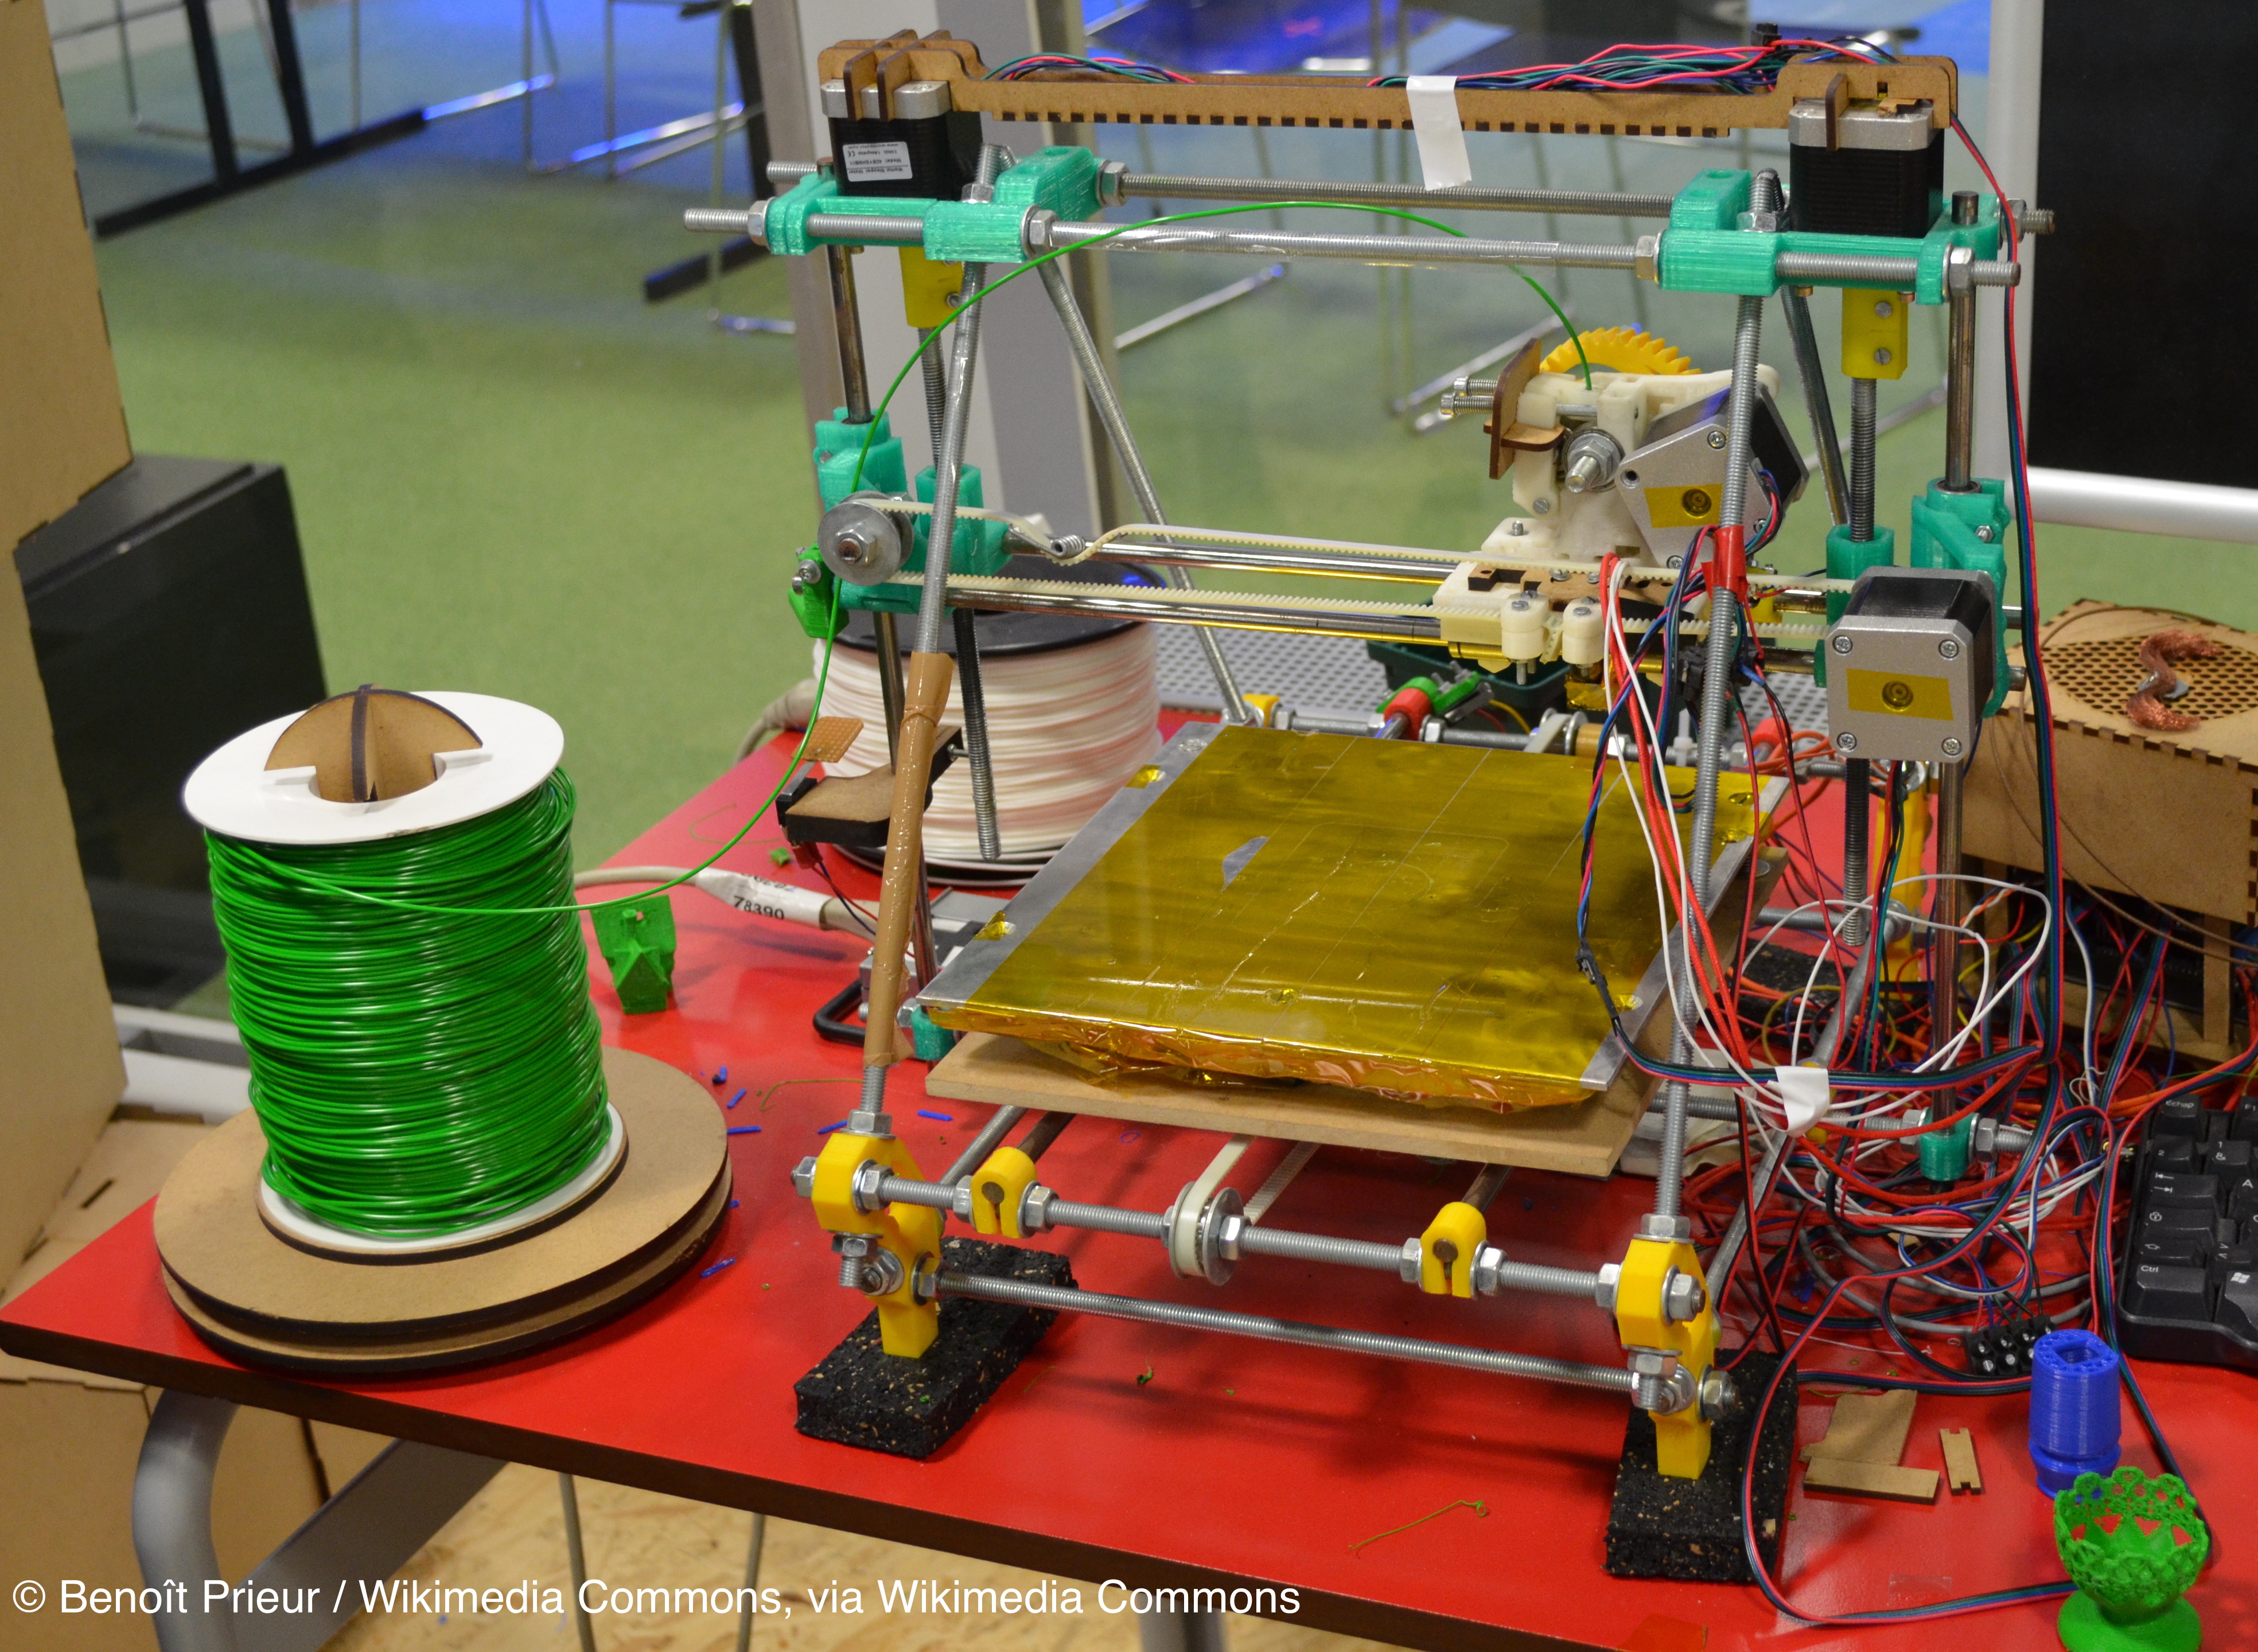 On Using a Makerspace for STEM Education